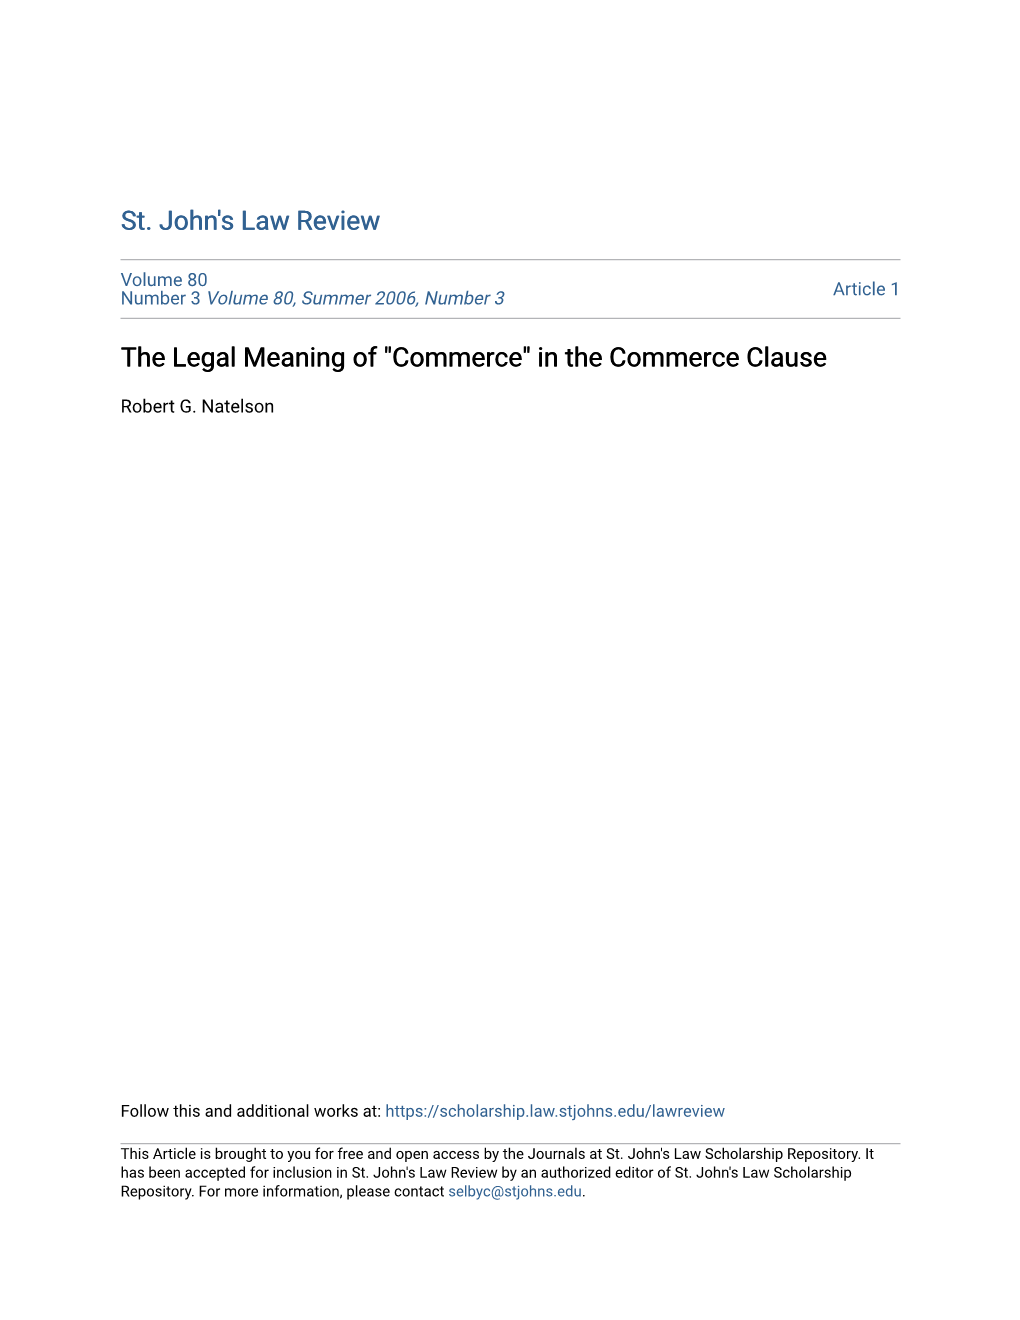 The Legal Meaning of "Commerce" in the Commerce Clause